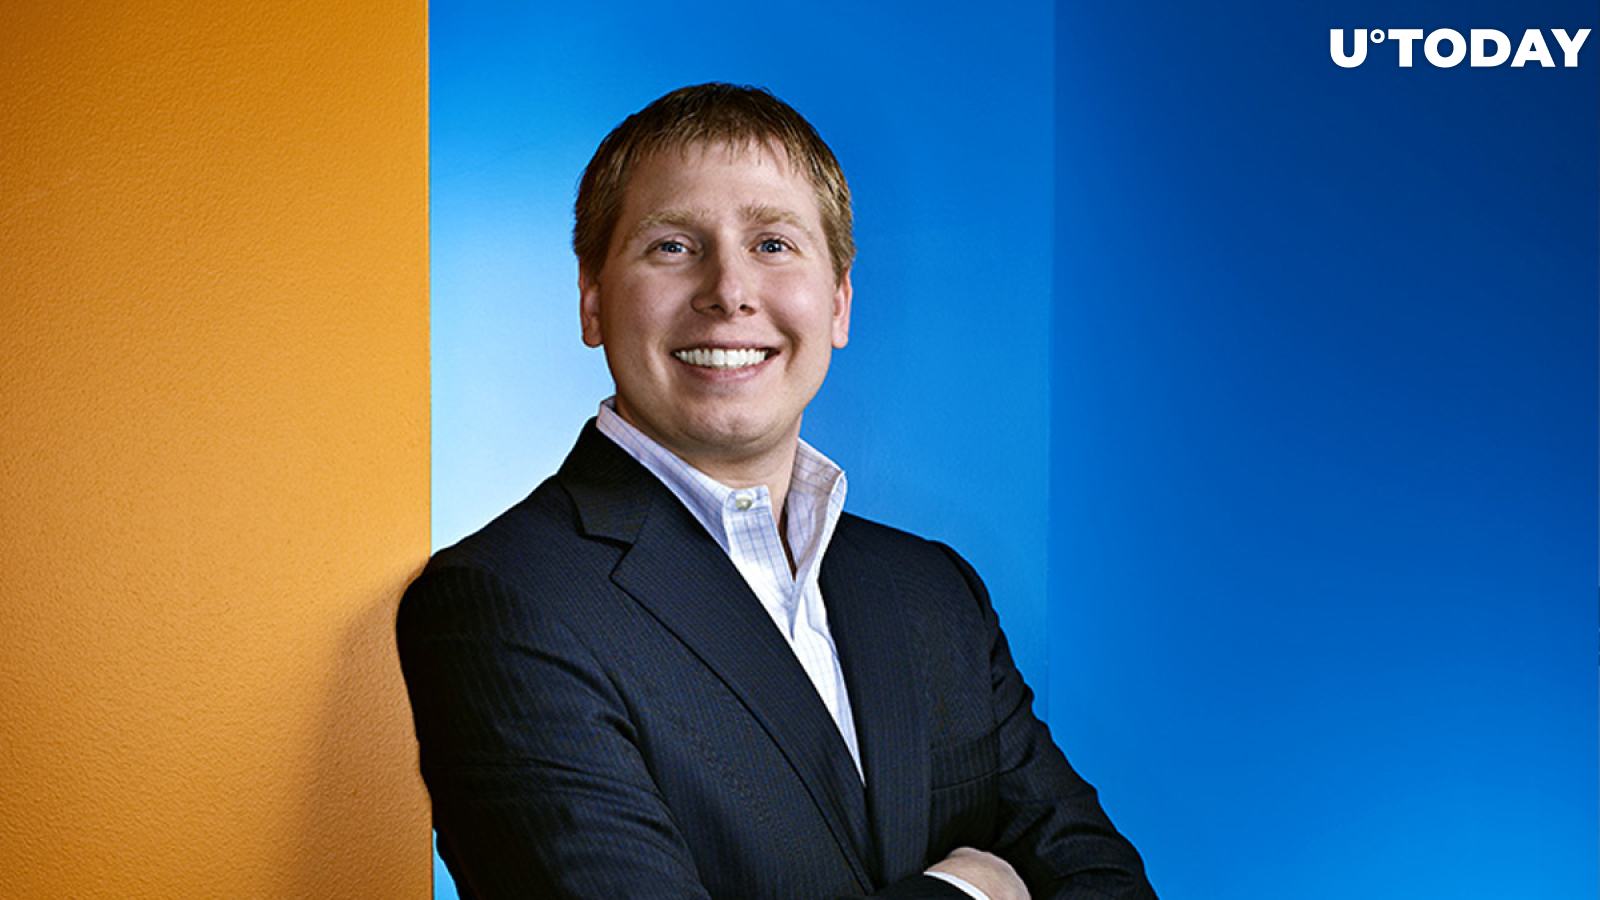 Grayscale Now Holds $7 Bln in Bitcoin and Other Crypto Assets: Founder Barry Silbert